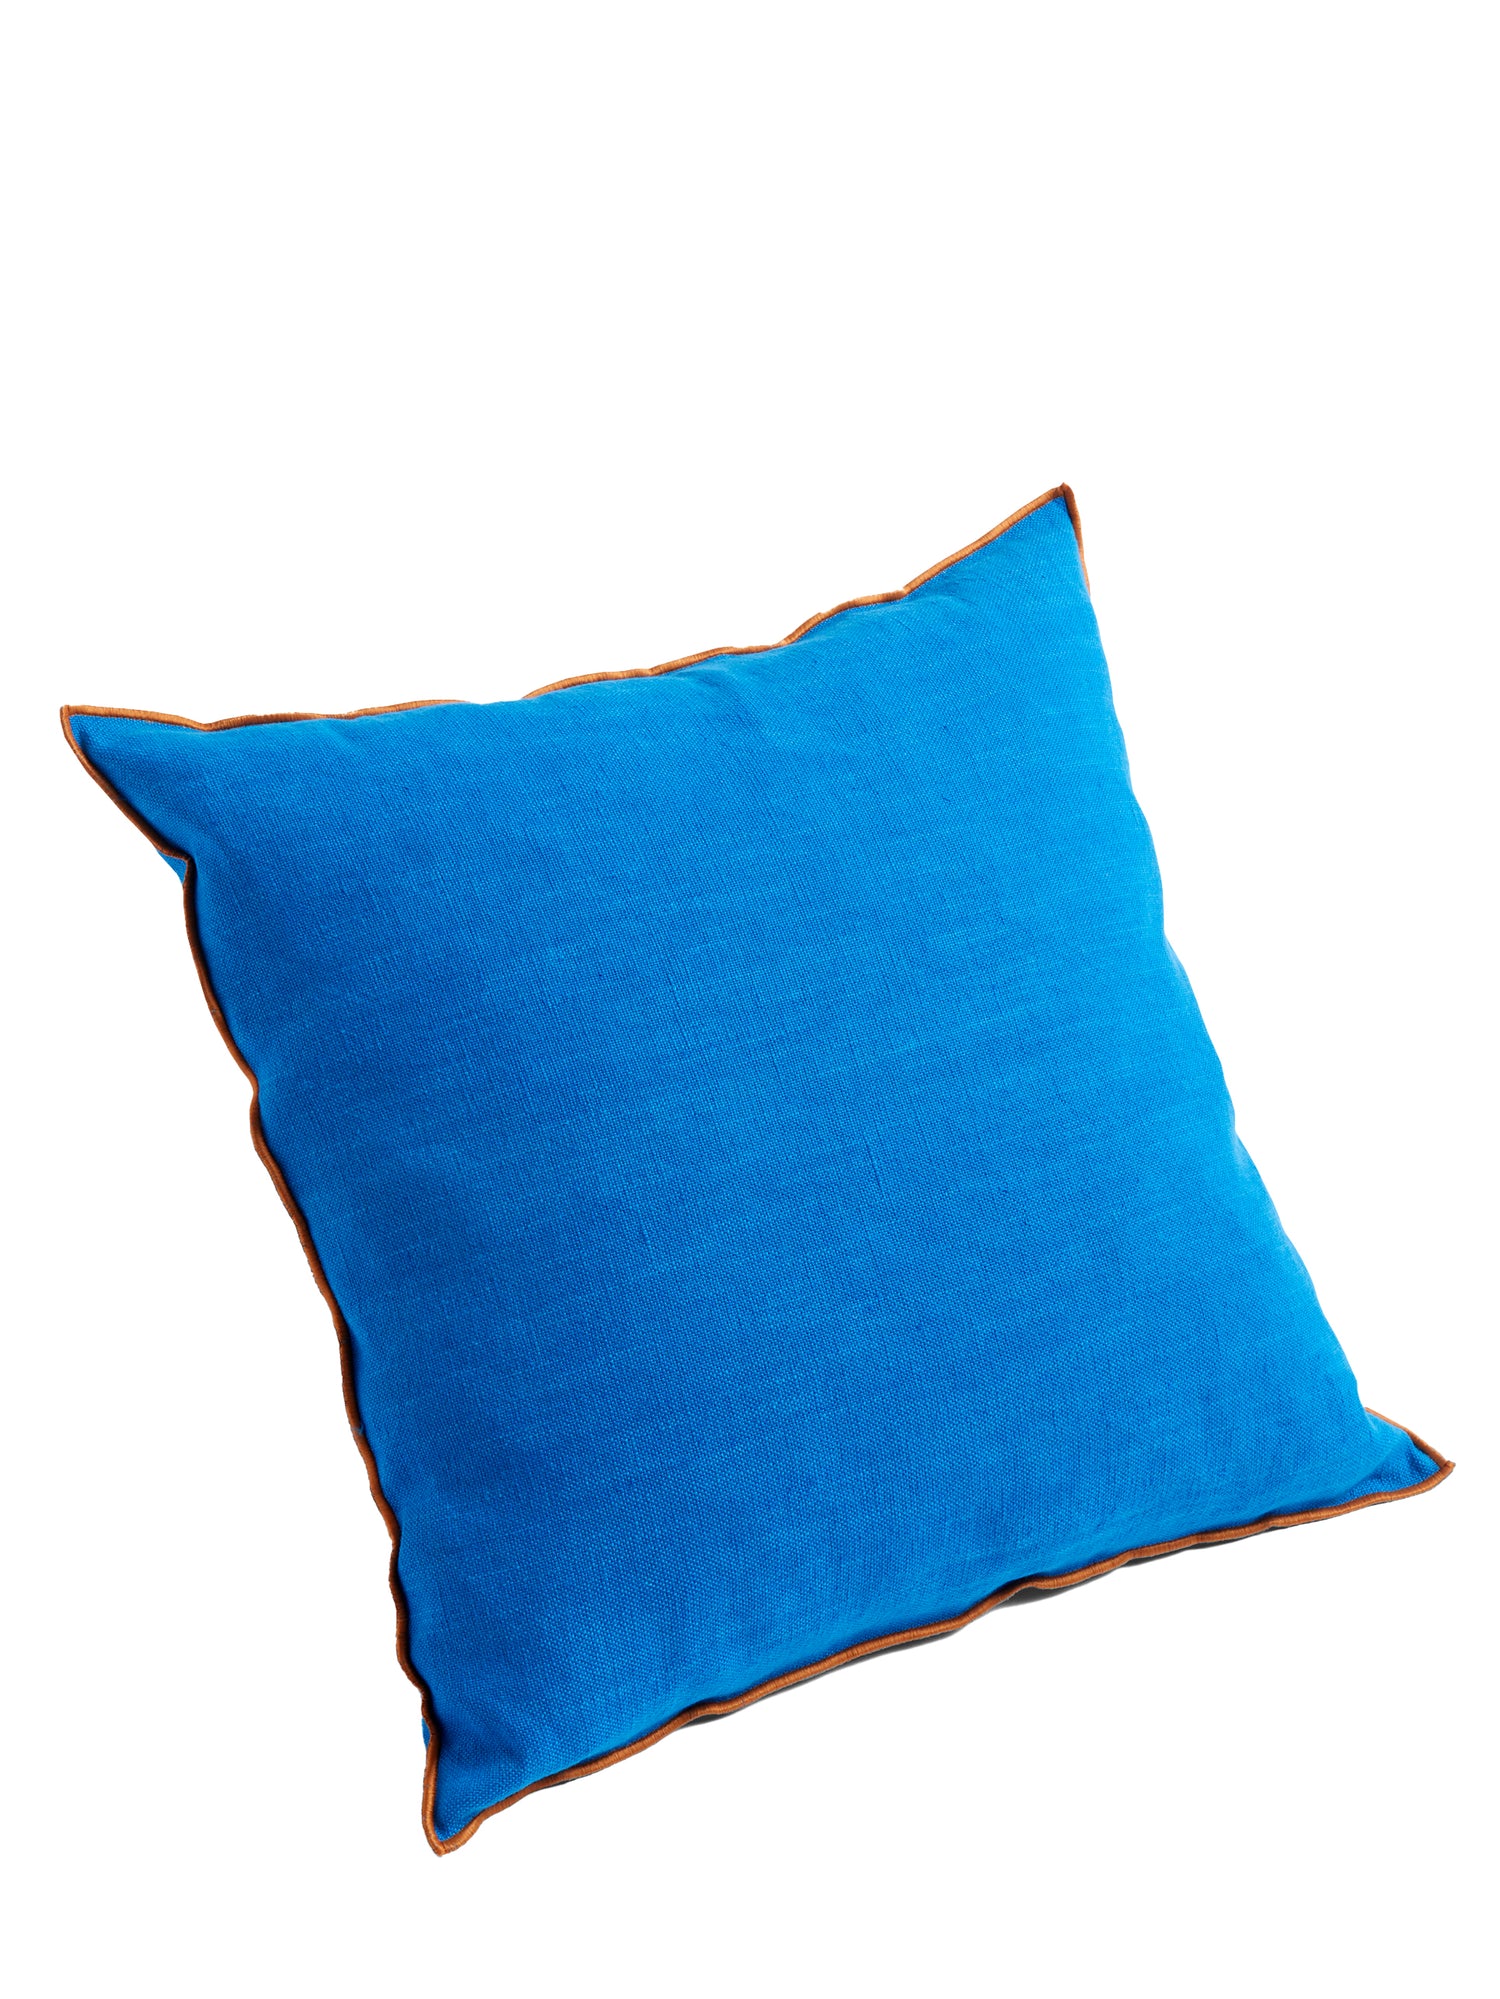 Outline Cushion, several colors